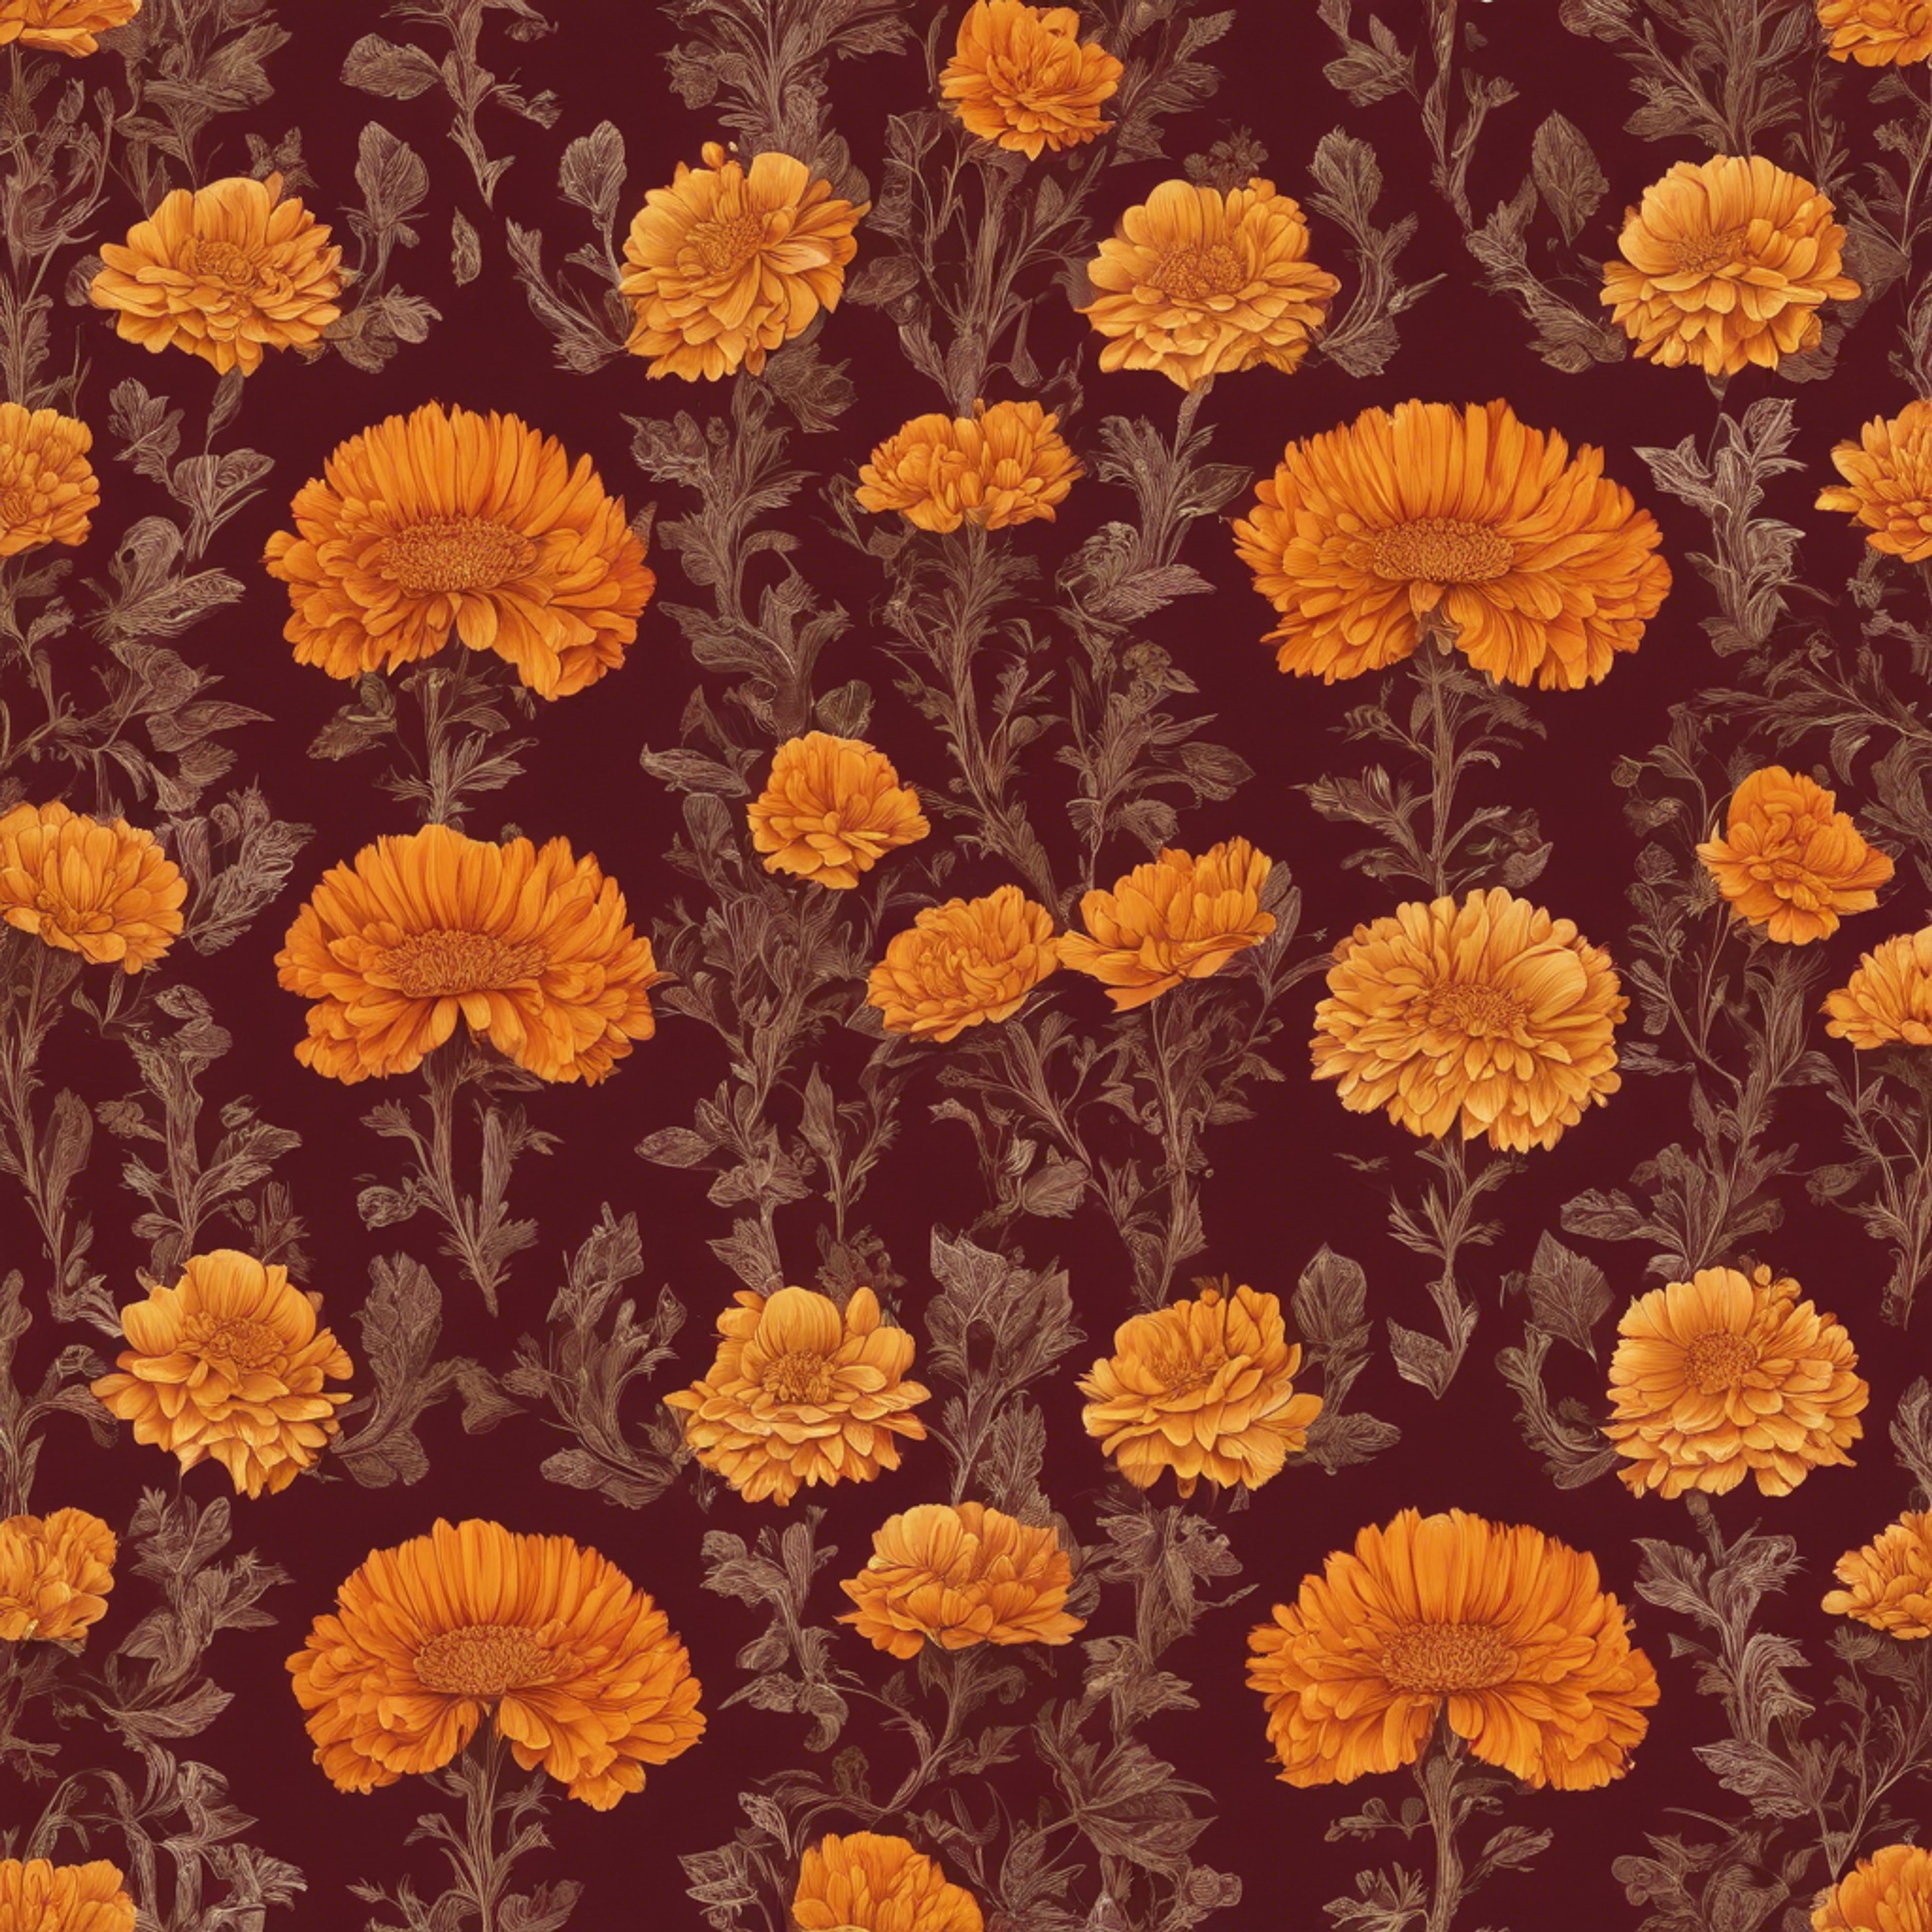 An intricate floral Indian pattern with lush marigold flowers set against a rich burgundy backdrop.壁紙[c9405a89b48f4293b188]